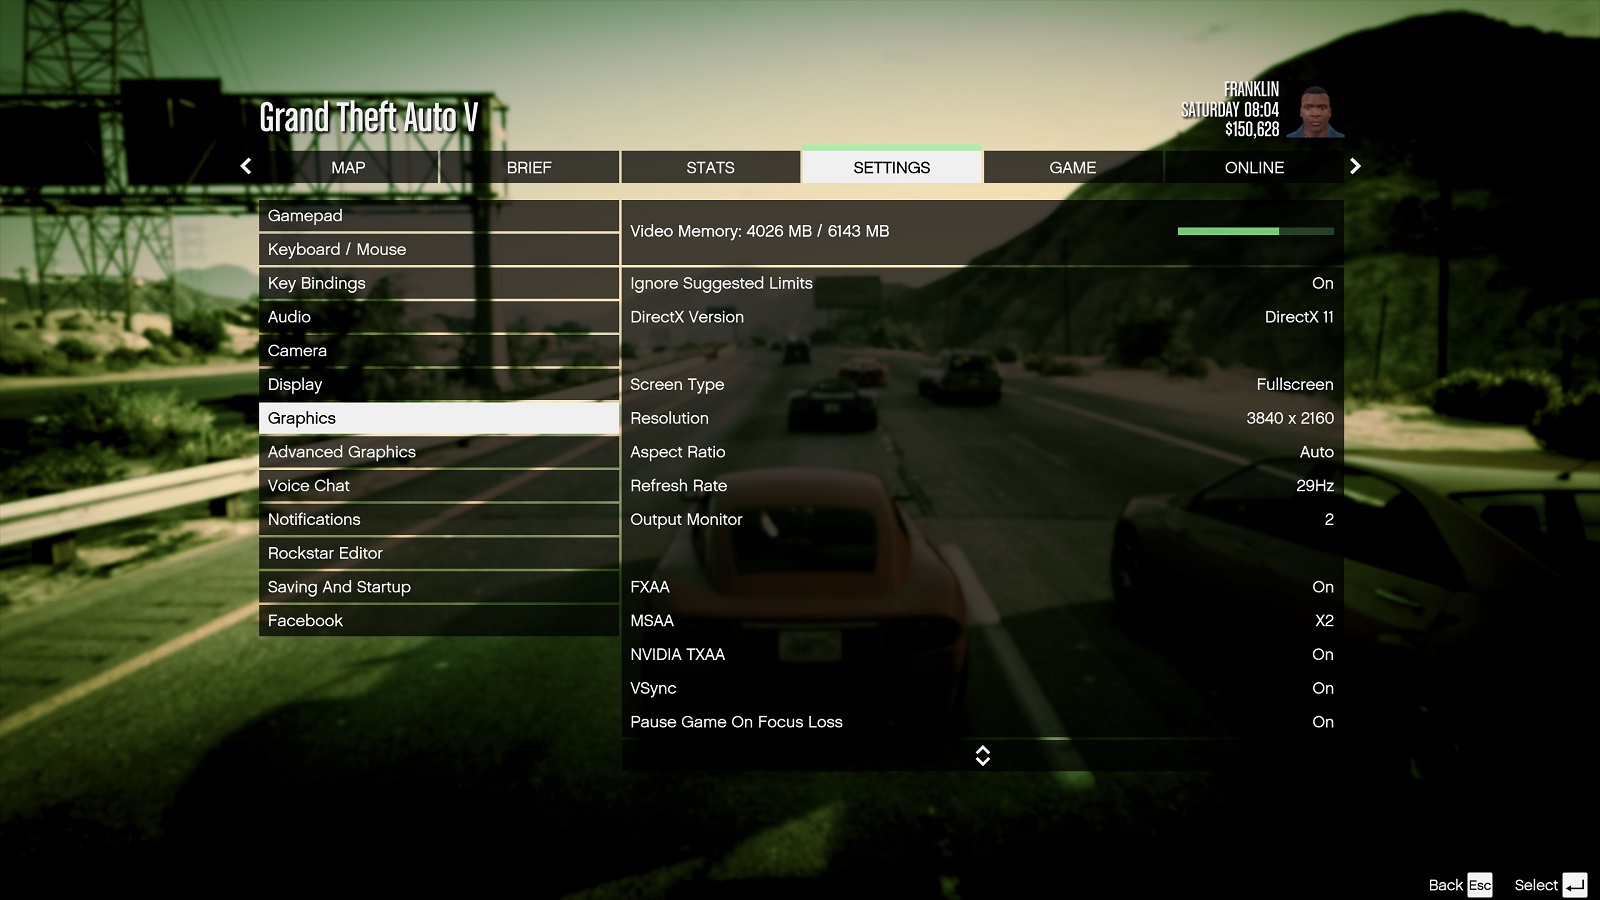 How to play Grand Theft Auto 5 on Linux